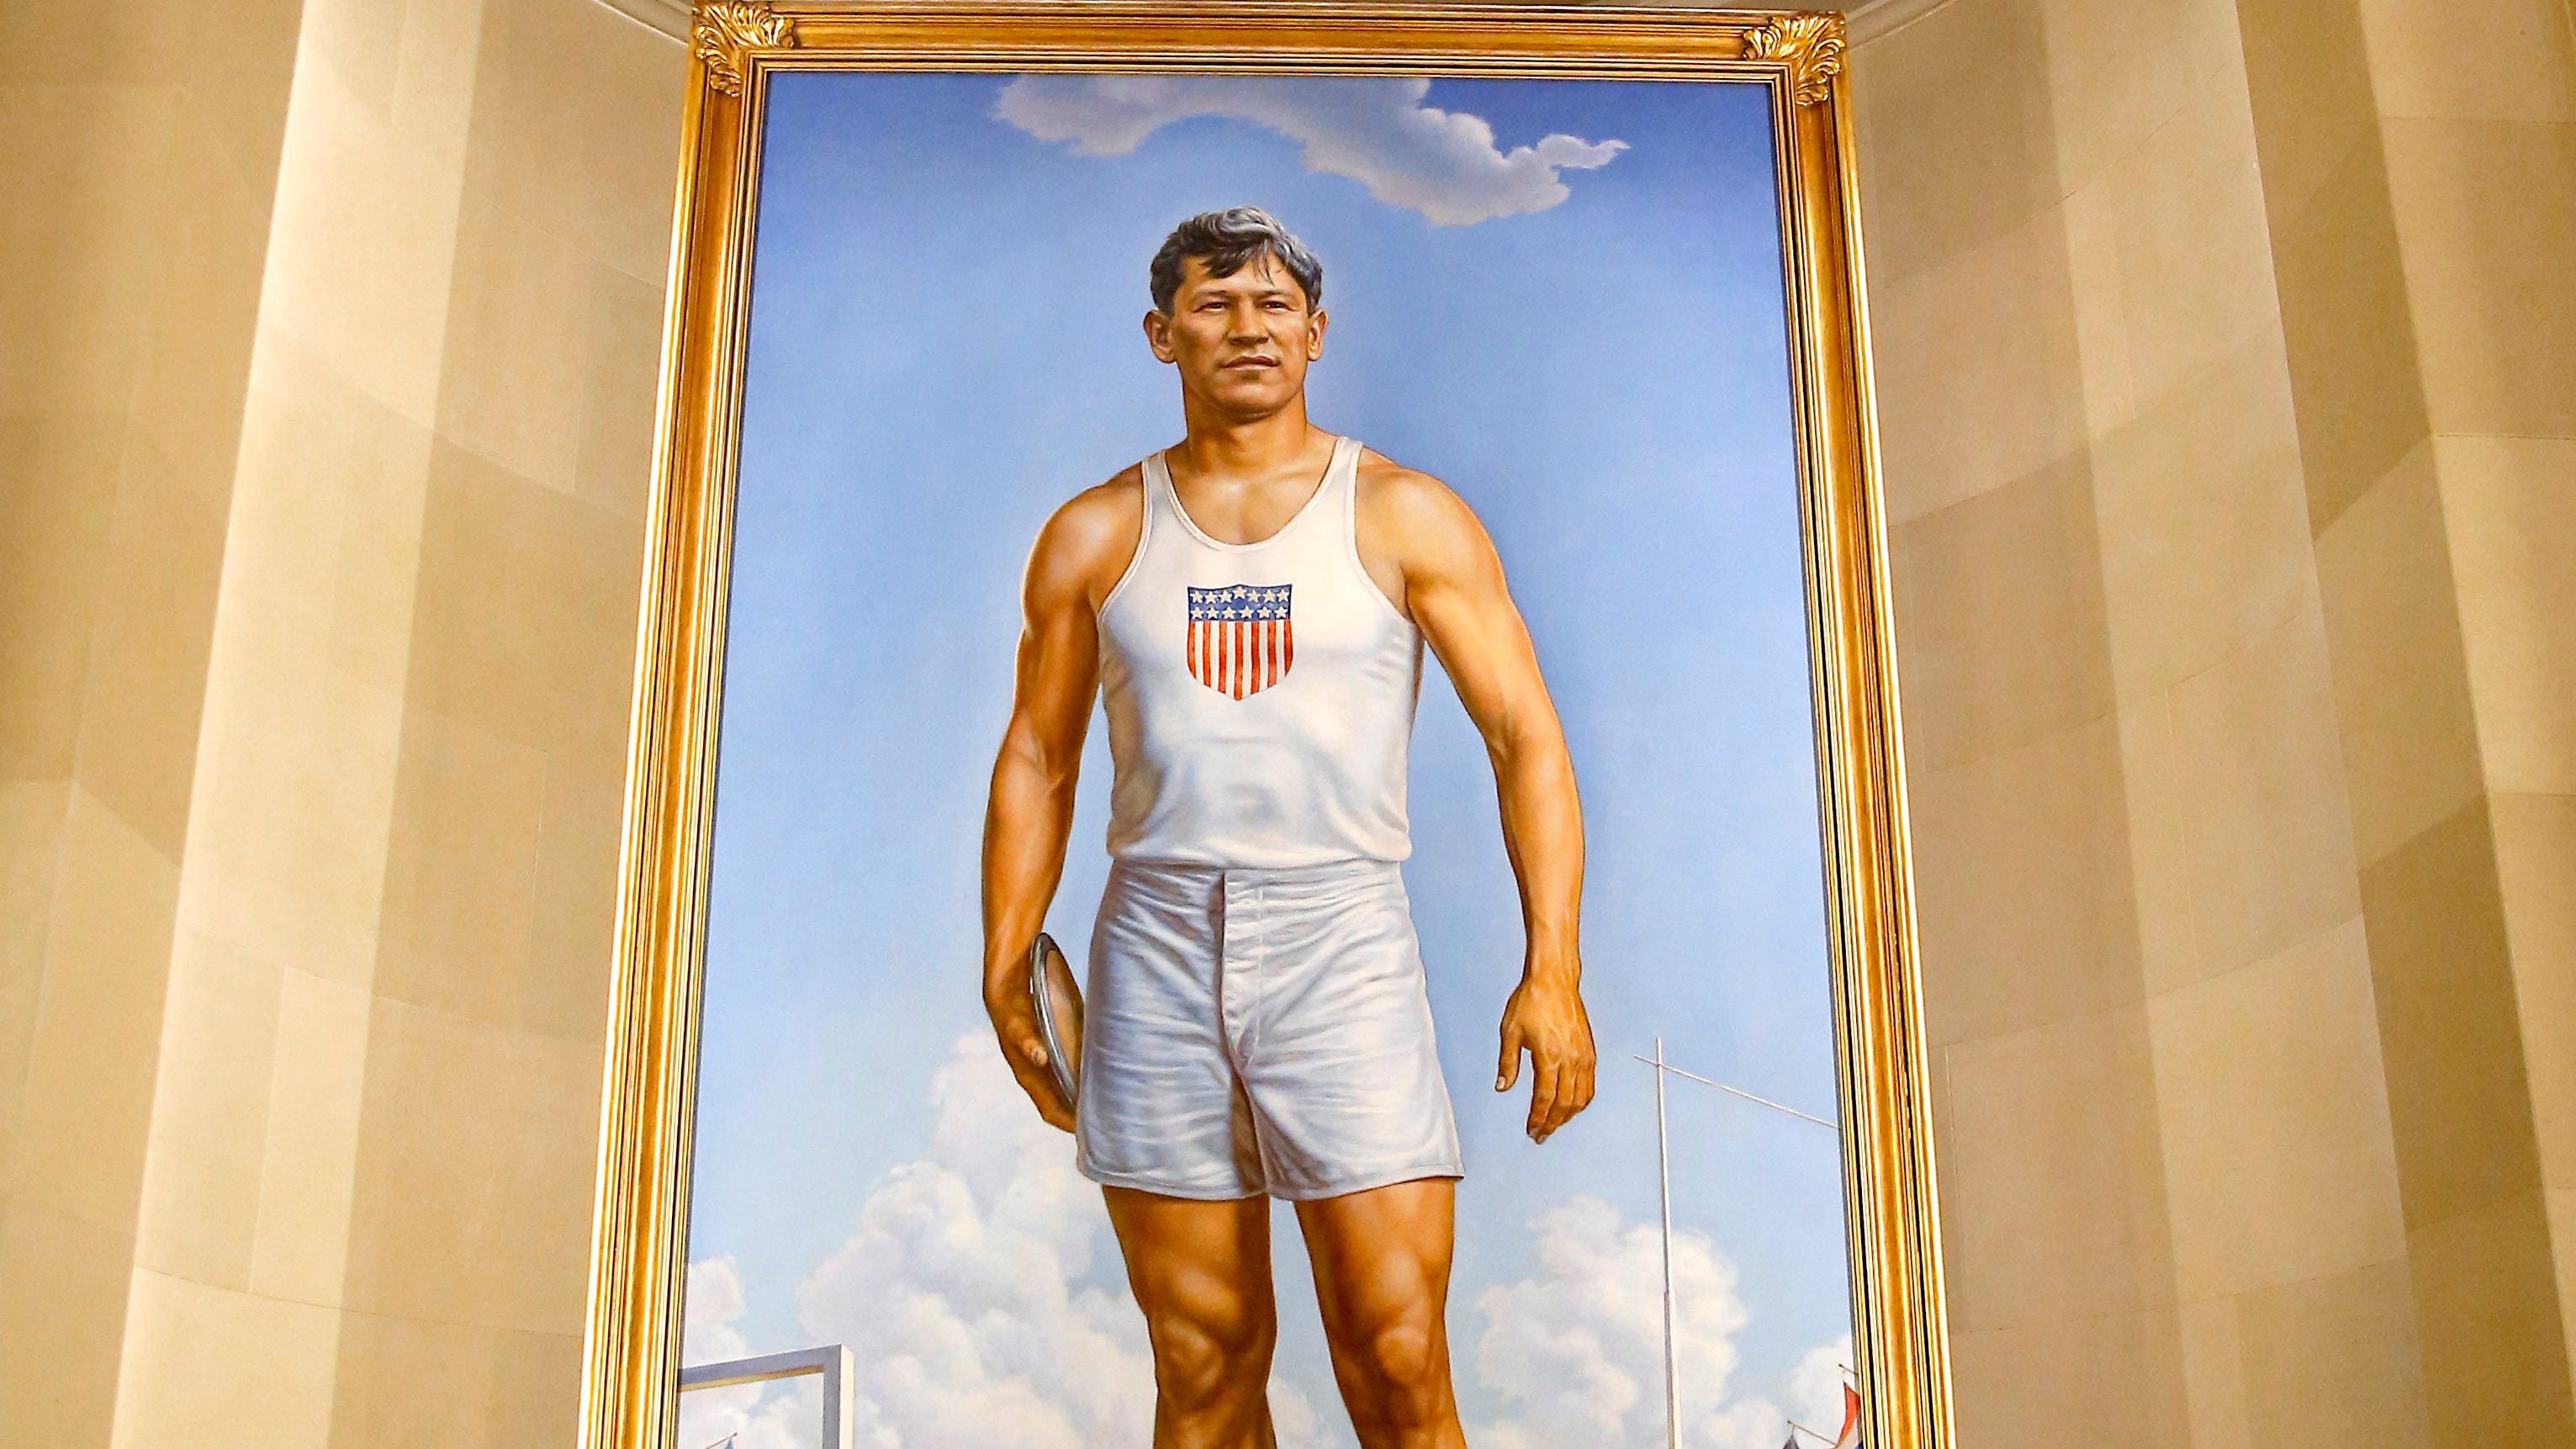 Why Jim Thorpe posthumously receiving Presidential Medal of Freedom means so much